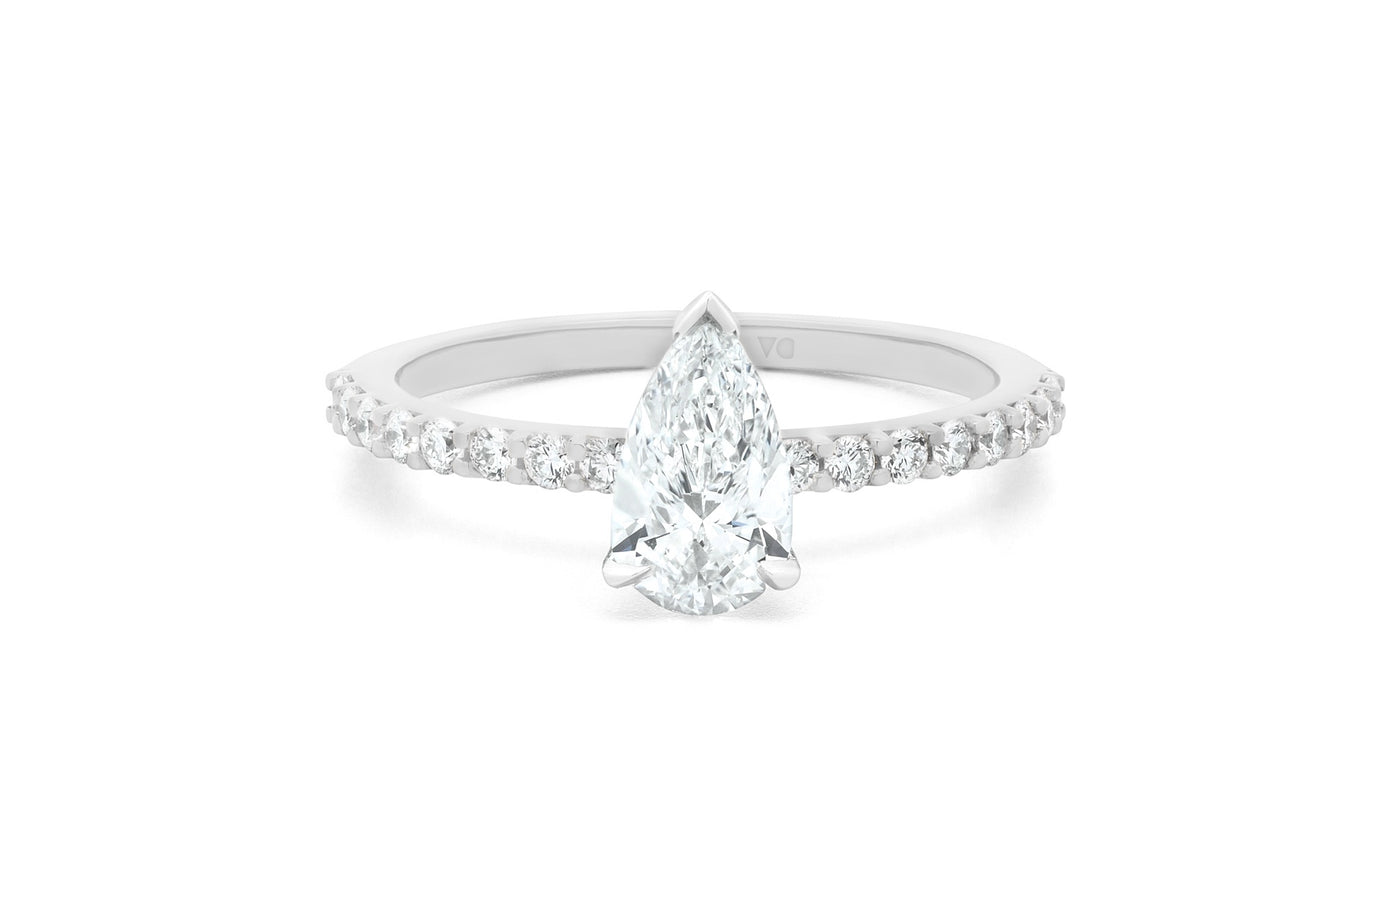 Honour: Pear Cut Diamond Solitaire Ring in Platinum or White Gold